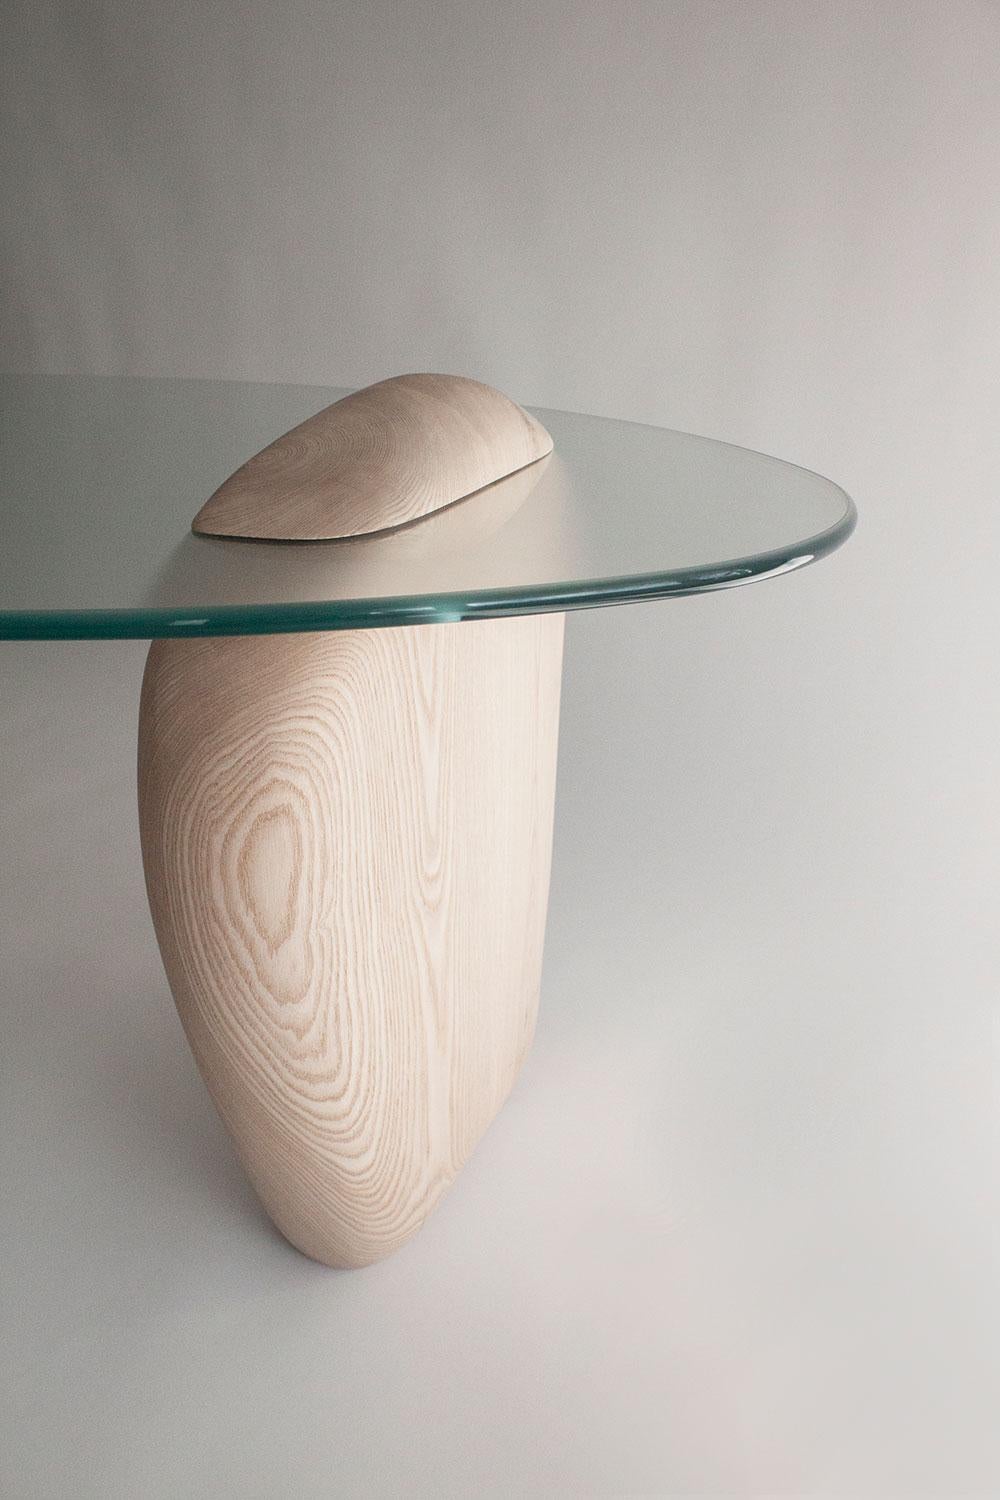 Reef, Contemporary Coffee Table, Carved Ash & Satin Glass Top by Nadine Hajjar For Sale 7